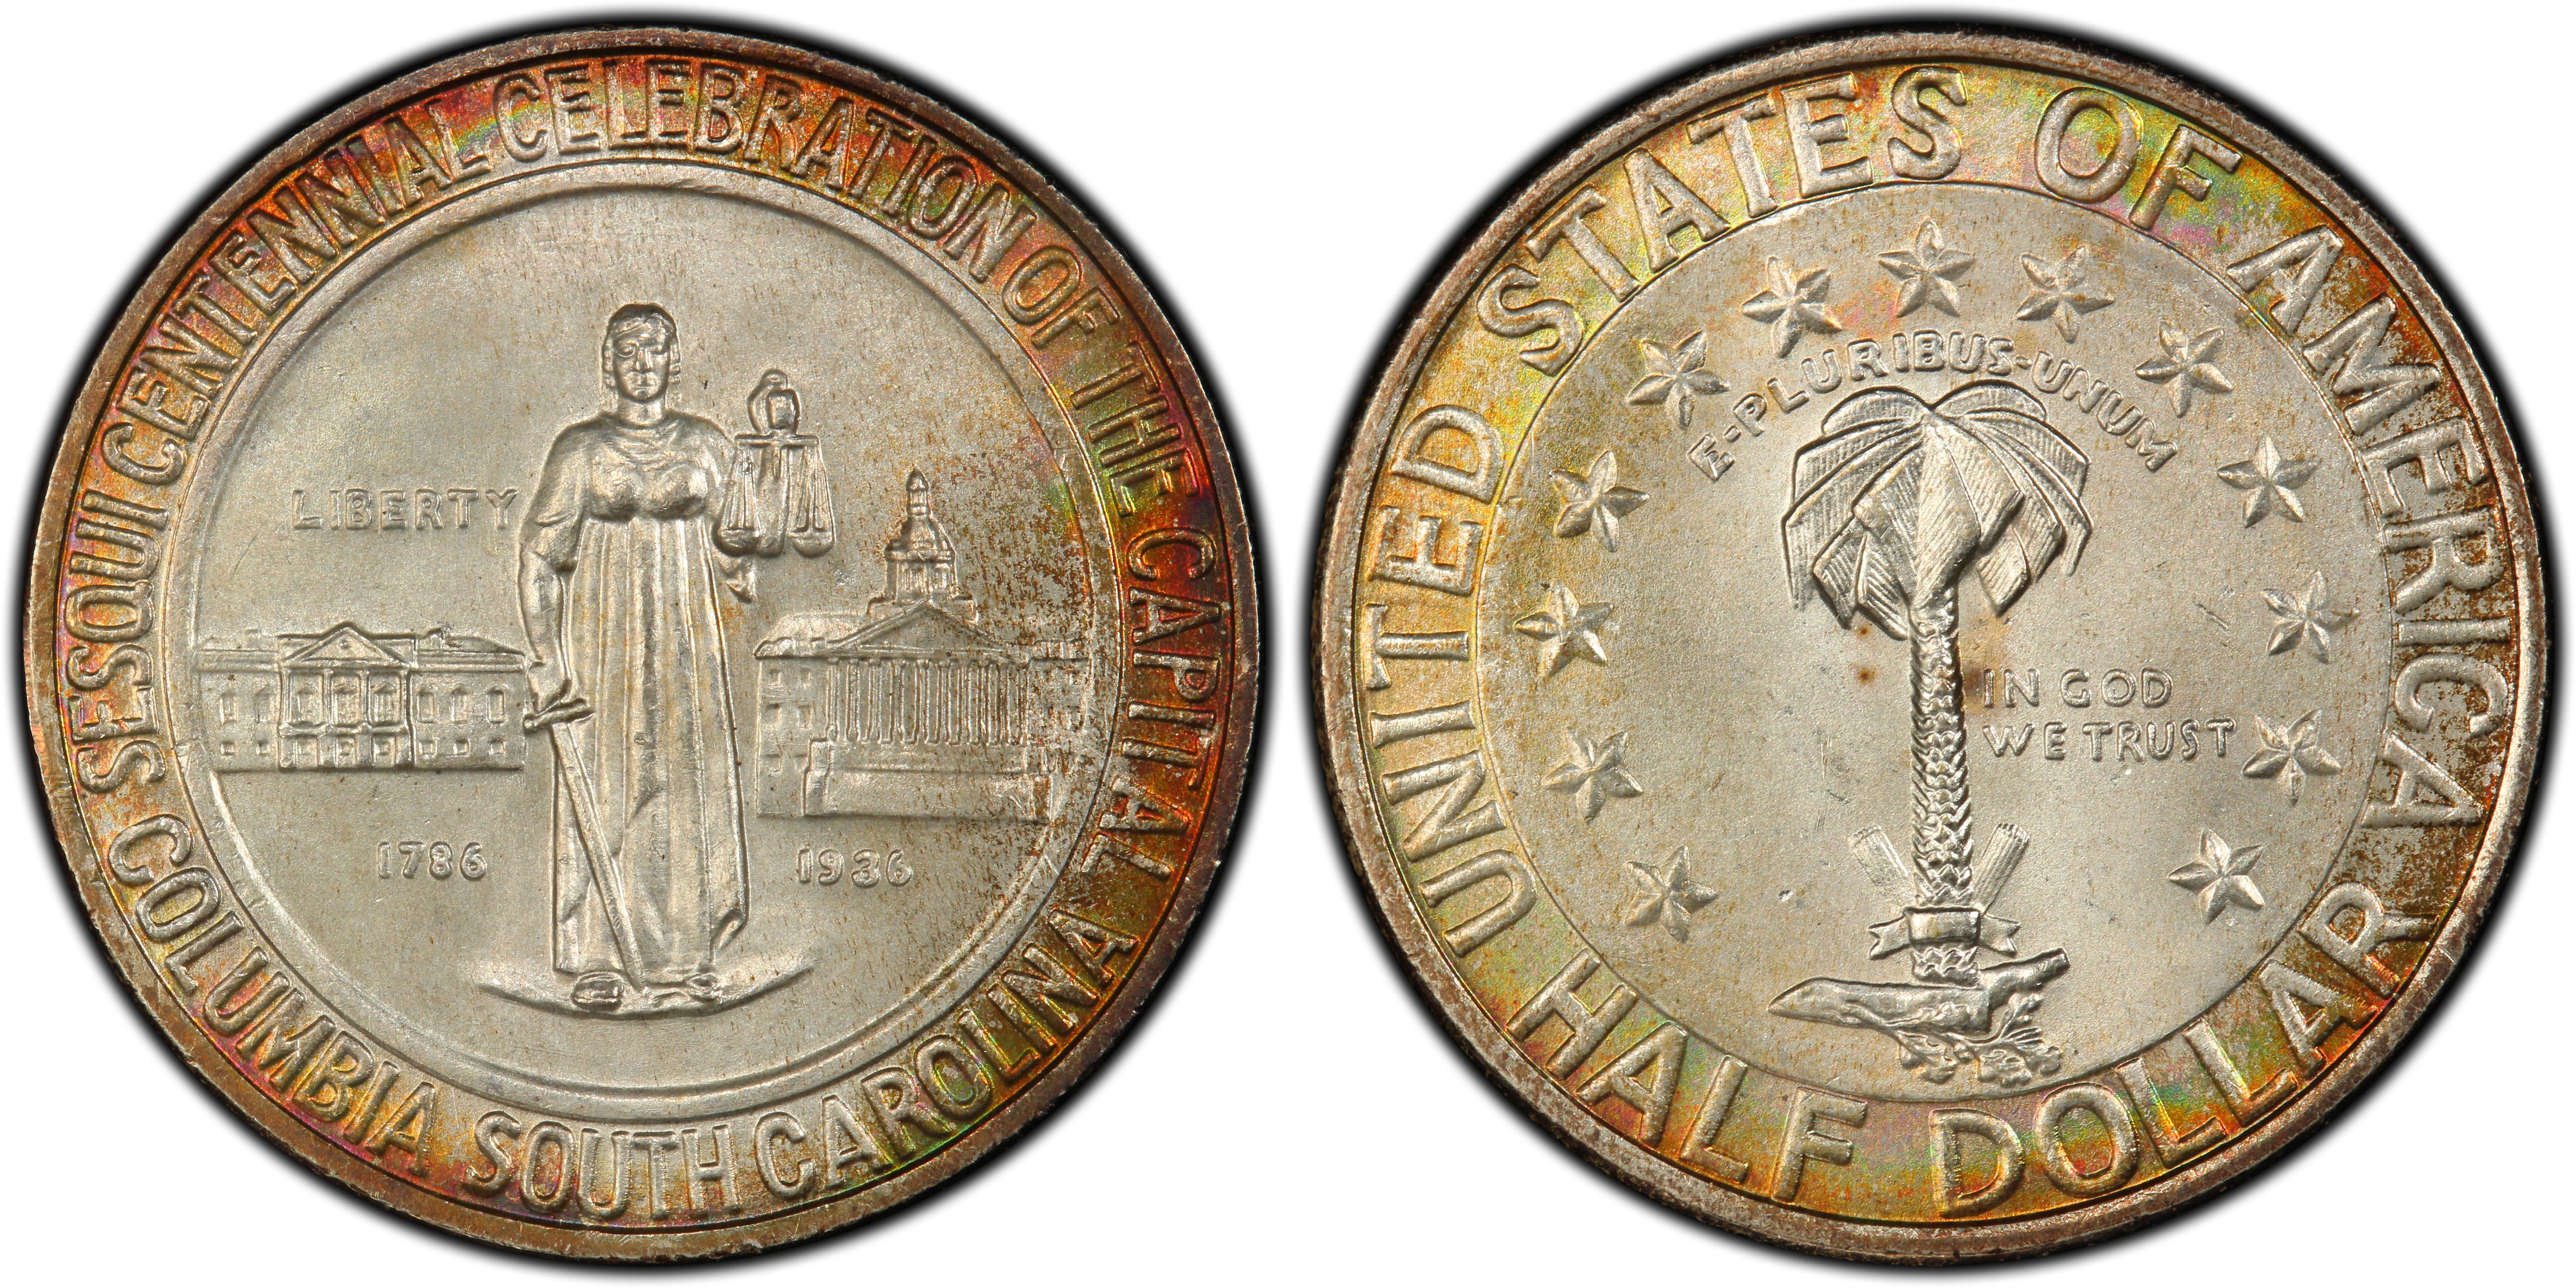 1936 50C Columbia (Regular Strike) Silver Commemorative - PCGS CoinFacts